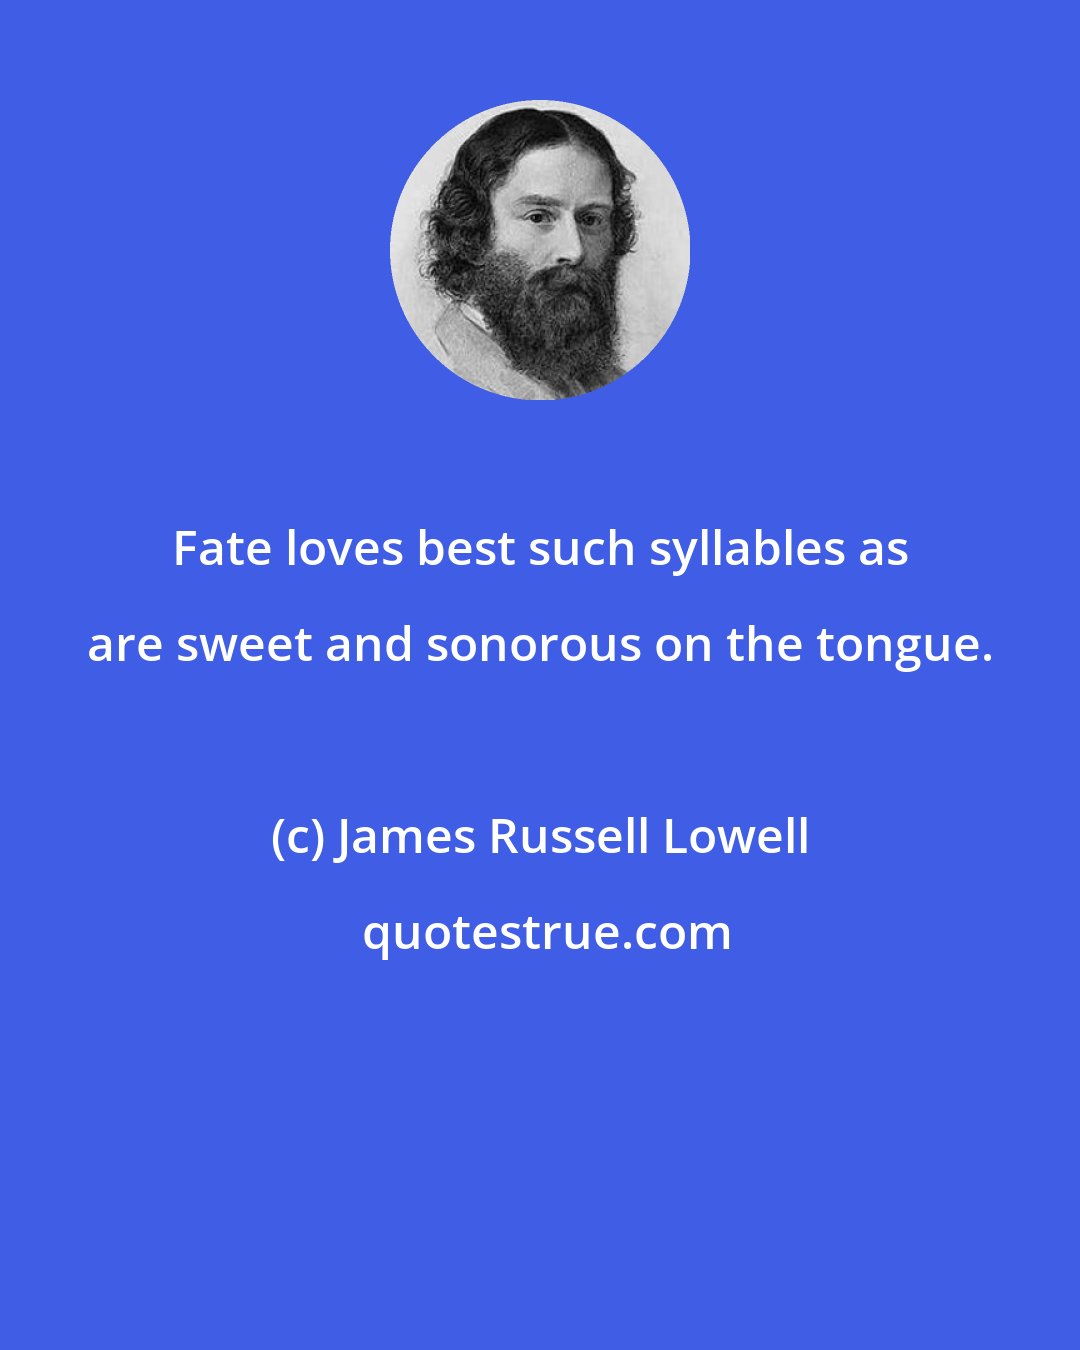 James Russell Lowell: Fate loves best such syllables as are sweet and sonorous on the tongue.